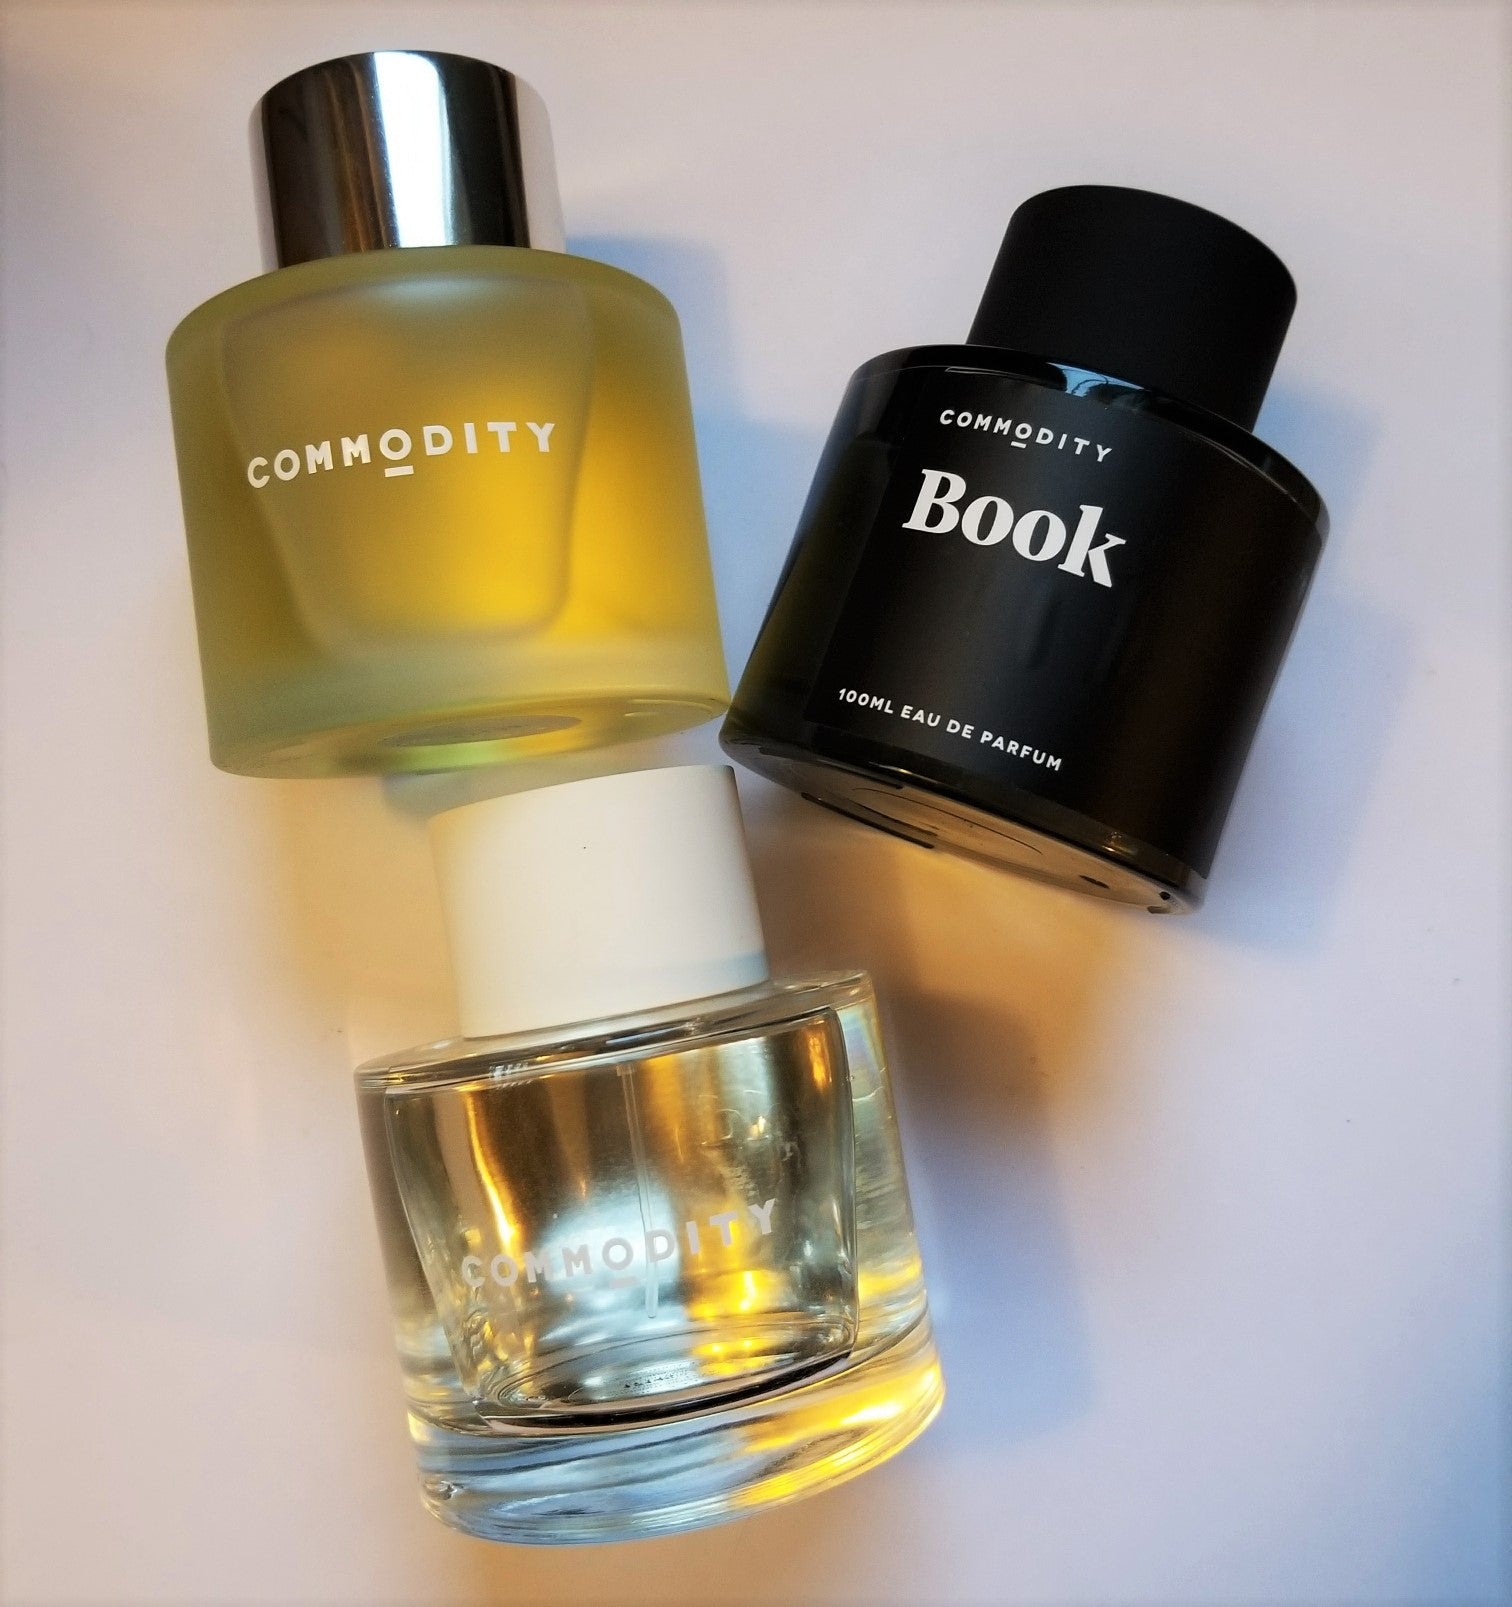 Review, Photos, Perfume, Fragrance Trend 2017, 2018, 2019: Commodity Fragrances, Bergamot, Book, Gold, Black Friday , Cyber Monday, Perfume, Cologne, Sale, Discount Code, Donation, Promo